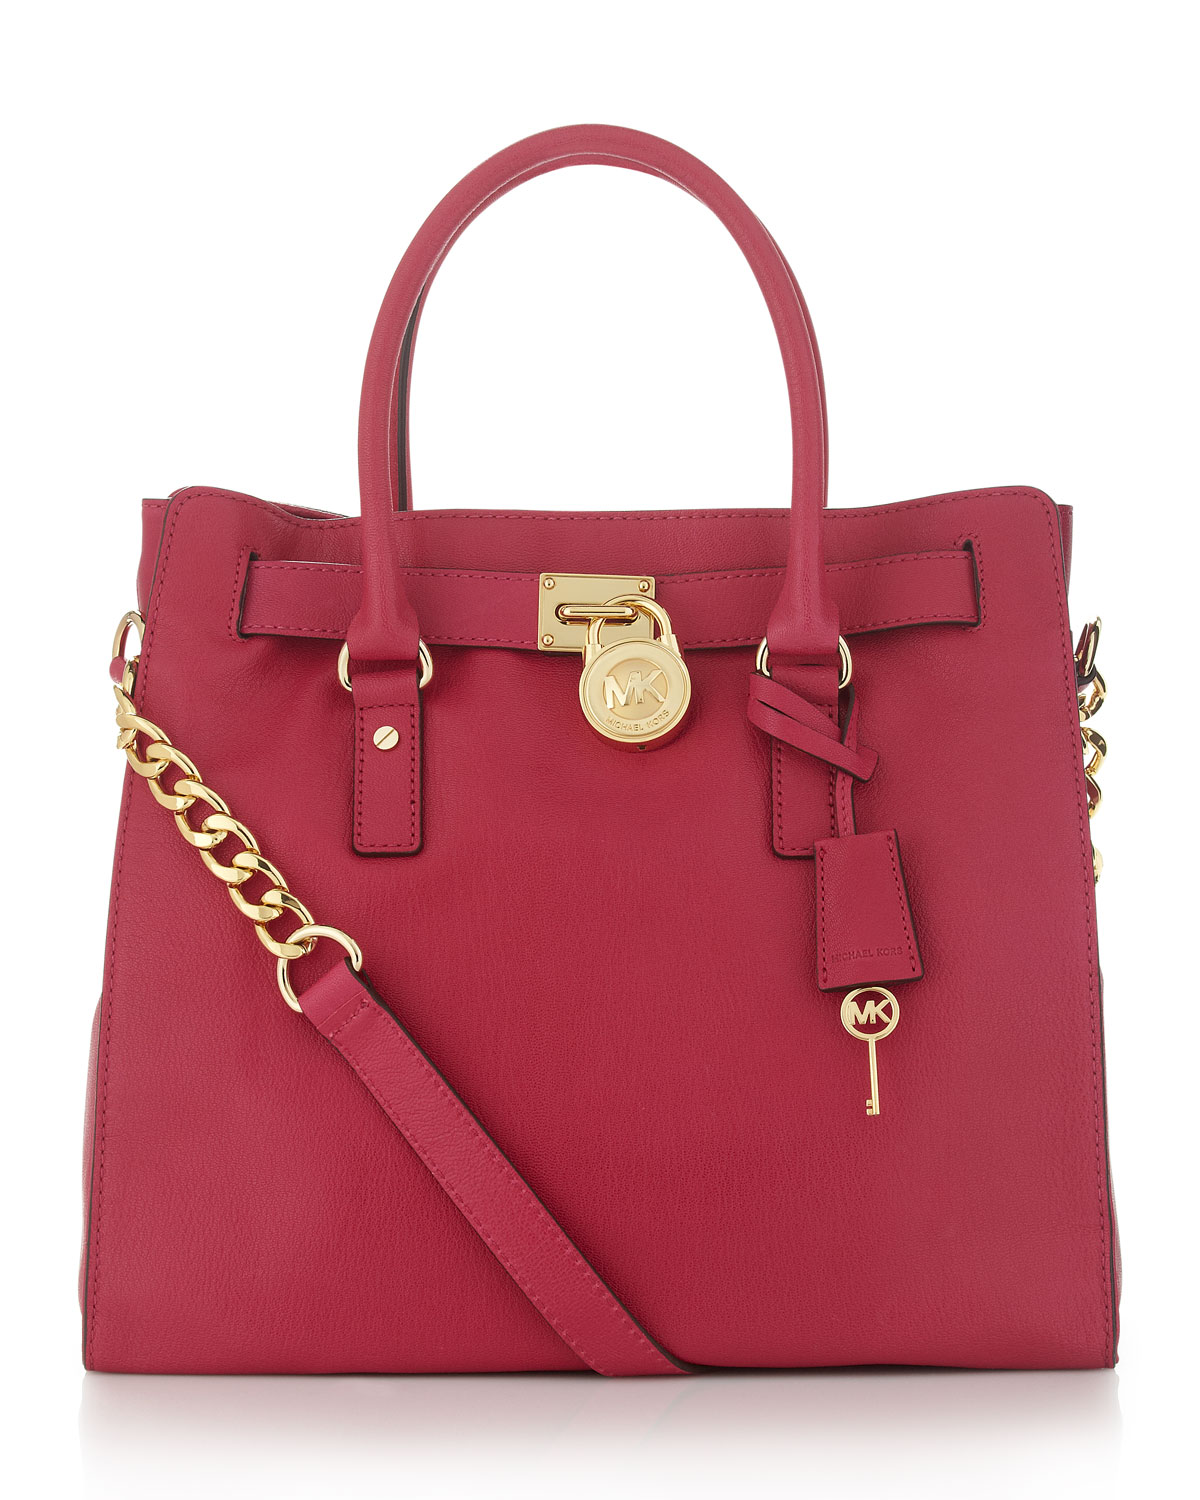 Lyst - Michael kors Hamilton Large Tote in Red